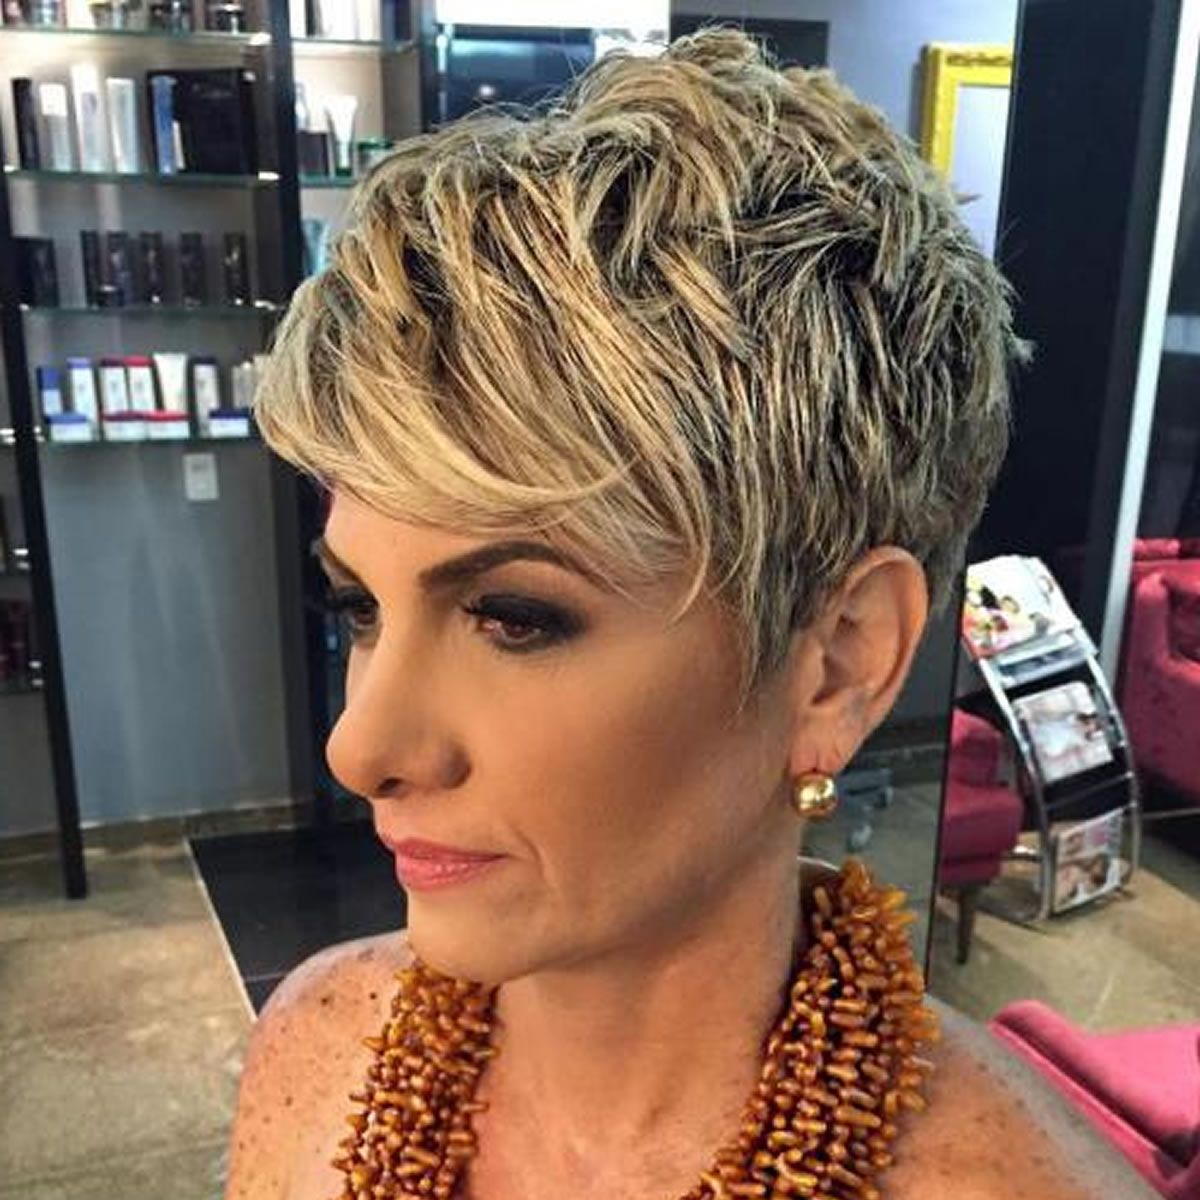 2018 Haircuts For Older Women Over 50 – New Trend Hair Ideas With Short Haircuts For Over 50s (View 24 of 25)